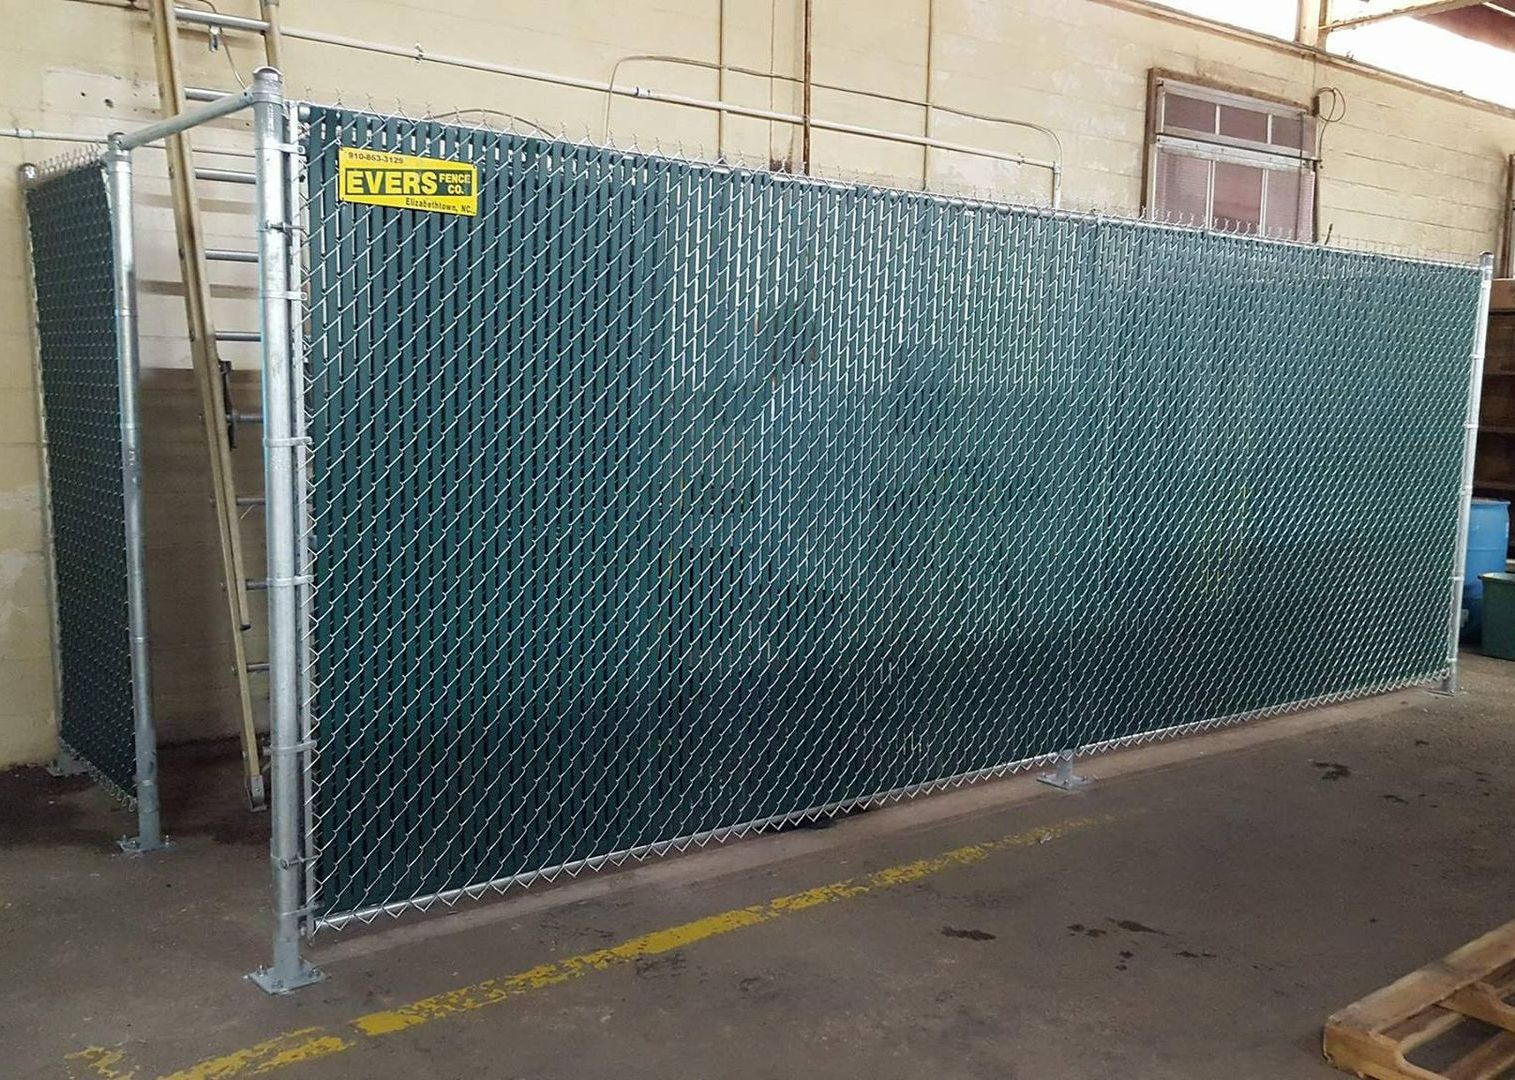 A green chain link fence with a yellow sign on it